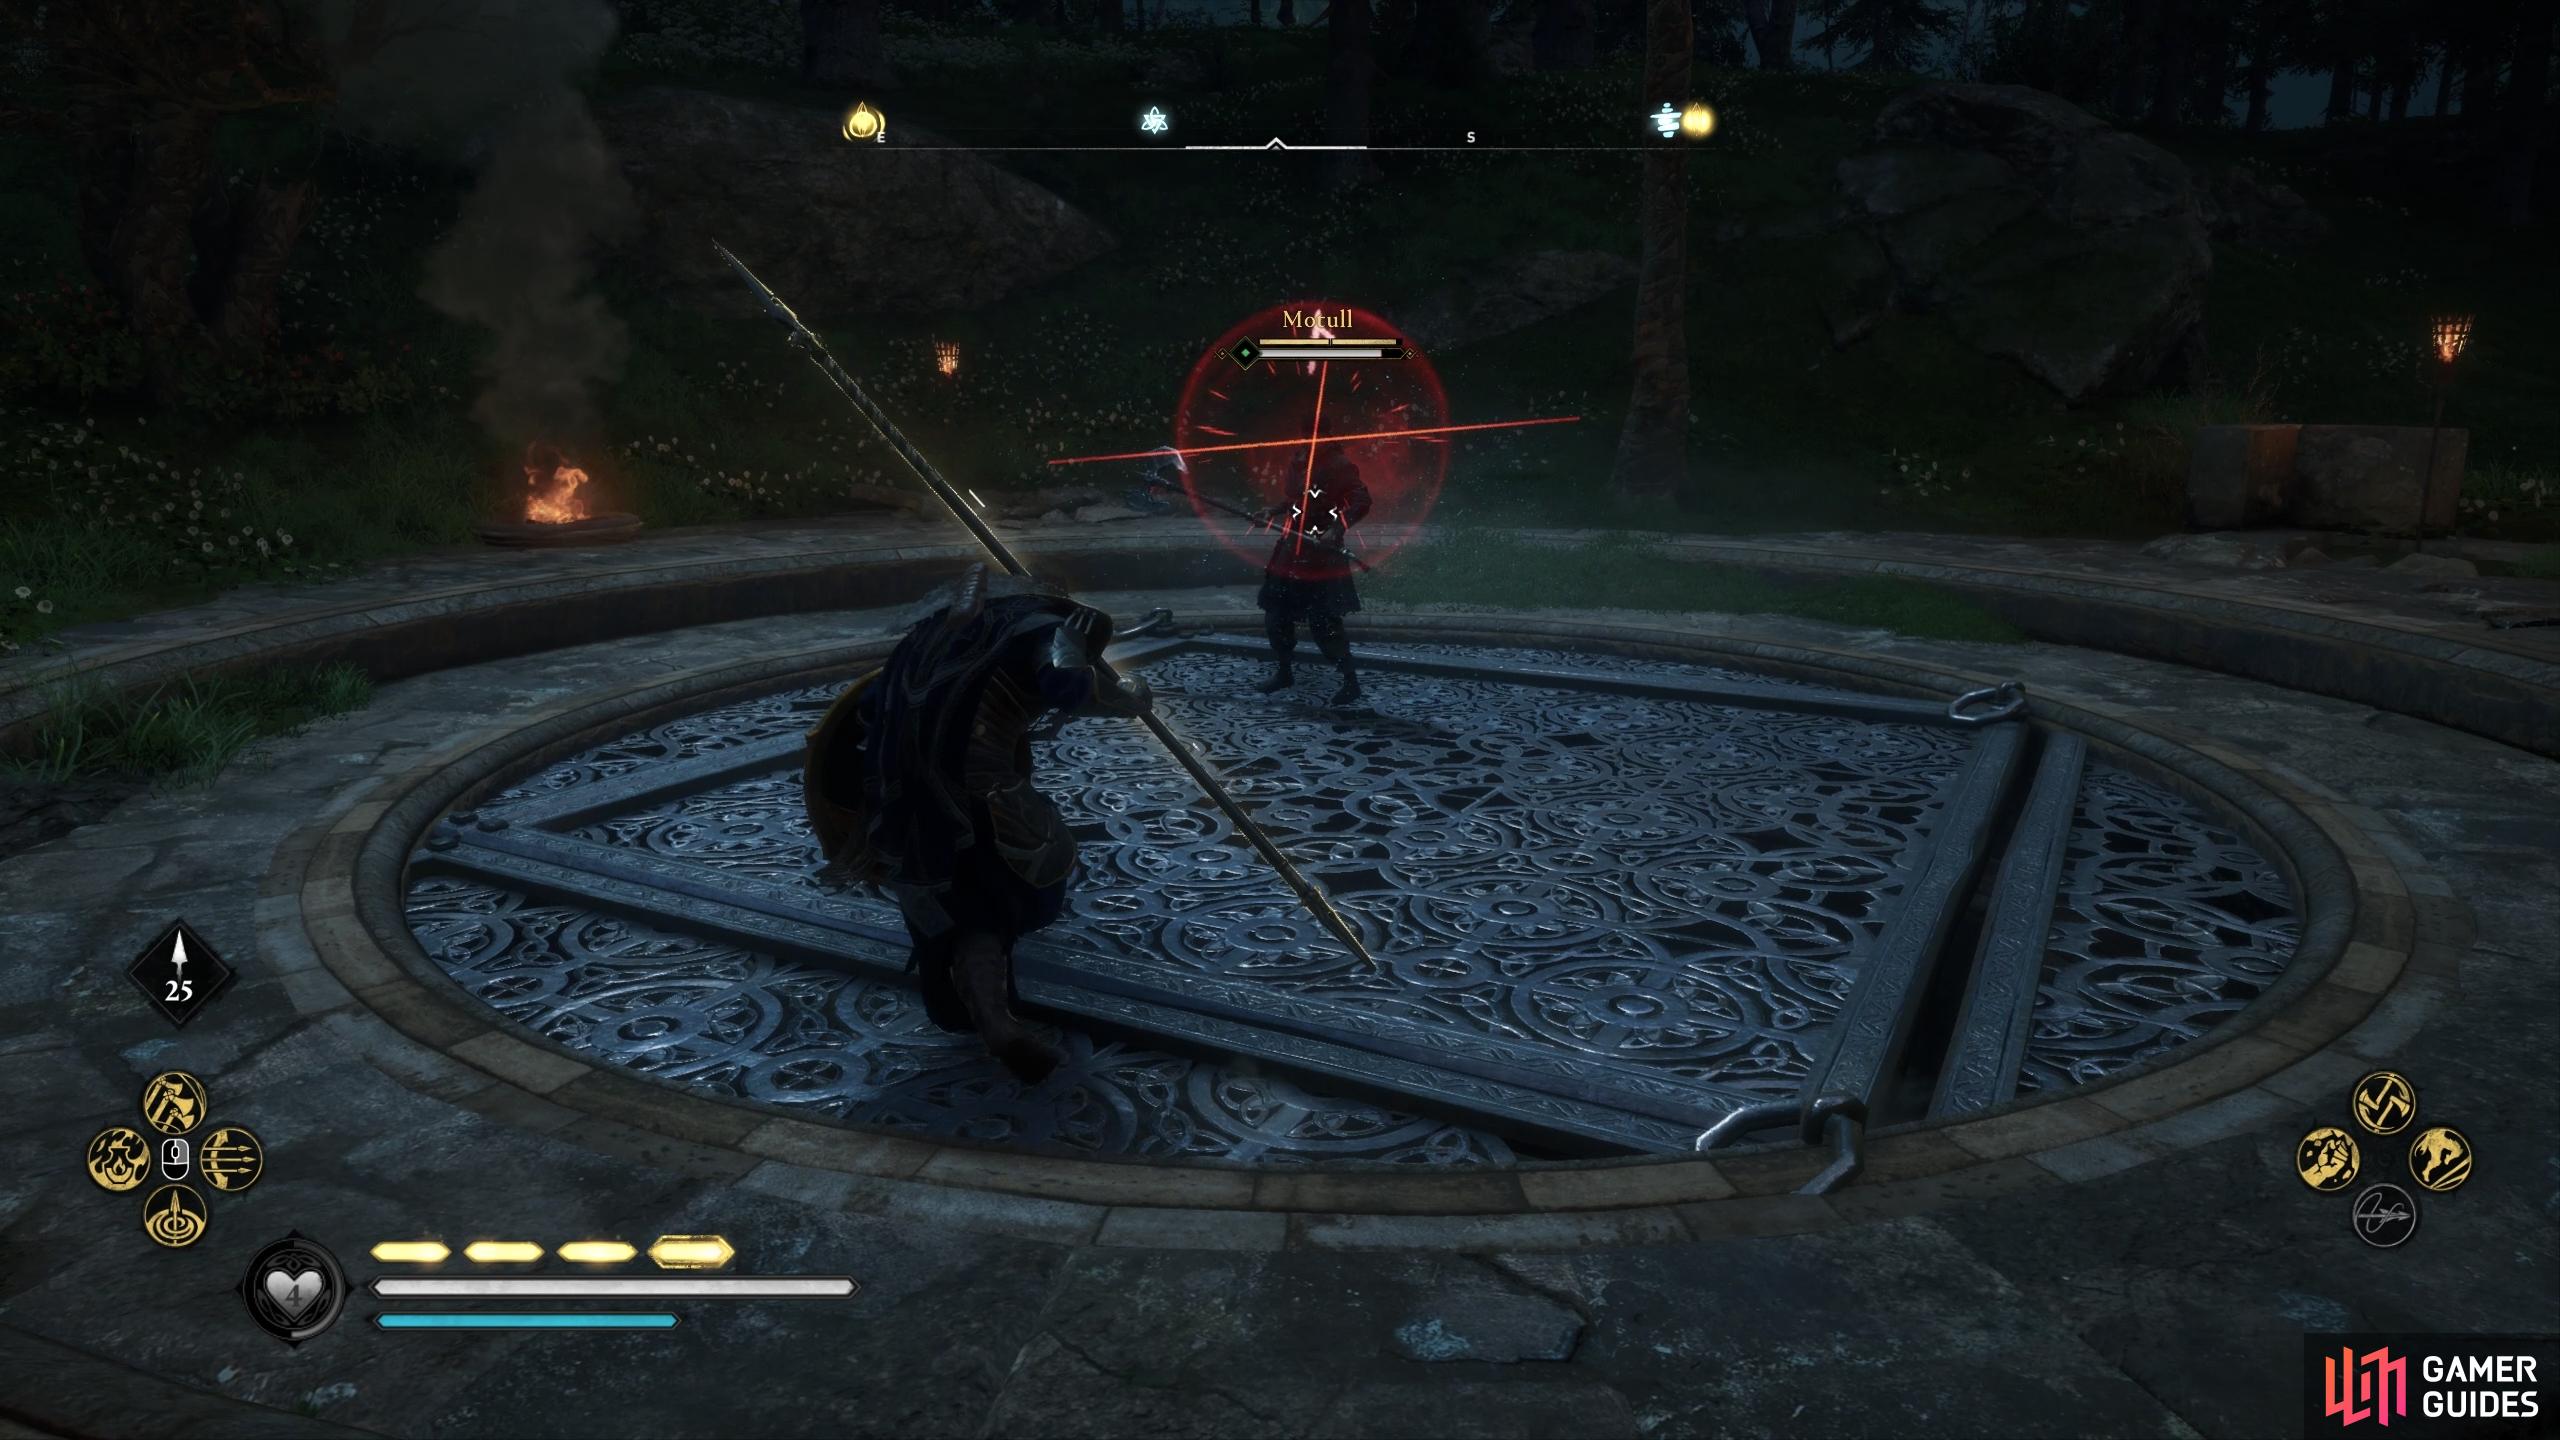 You won't be able to block or parry Motull's red rune attacks, so you'll have to dodge, roll, or round around him.